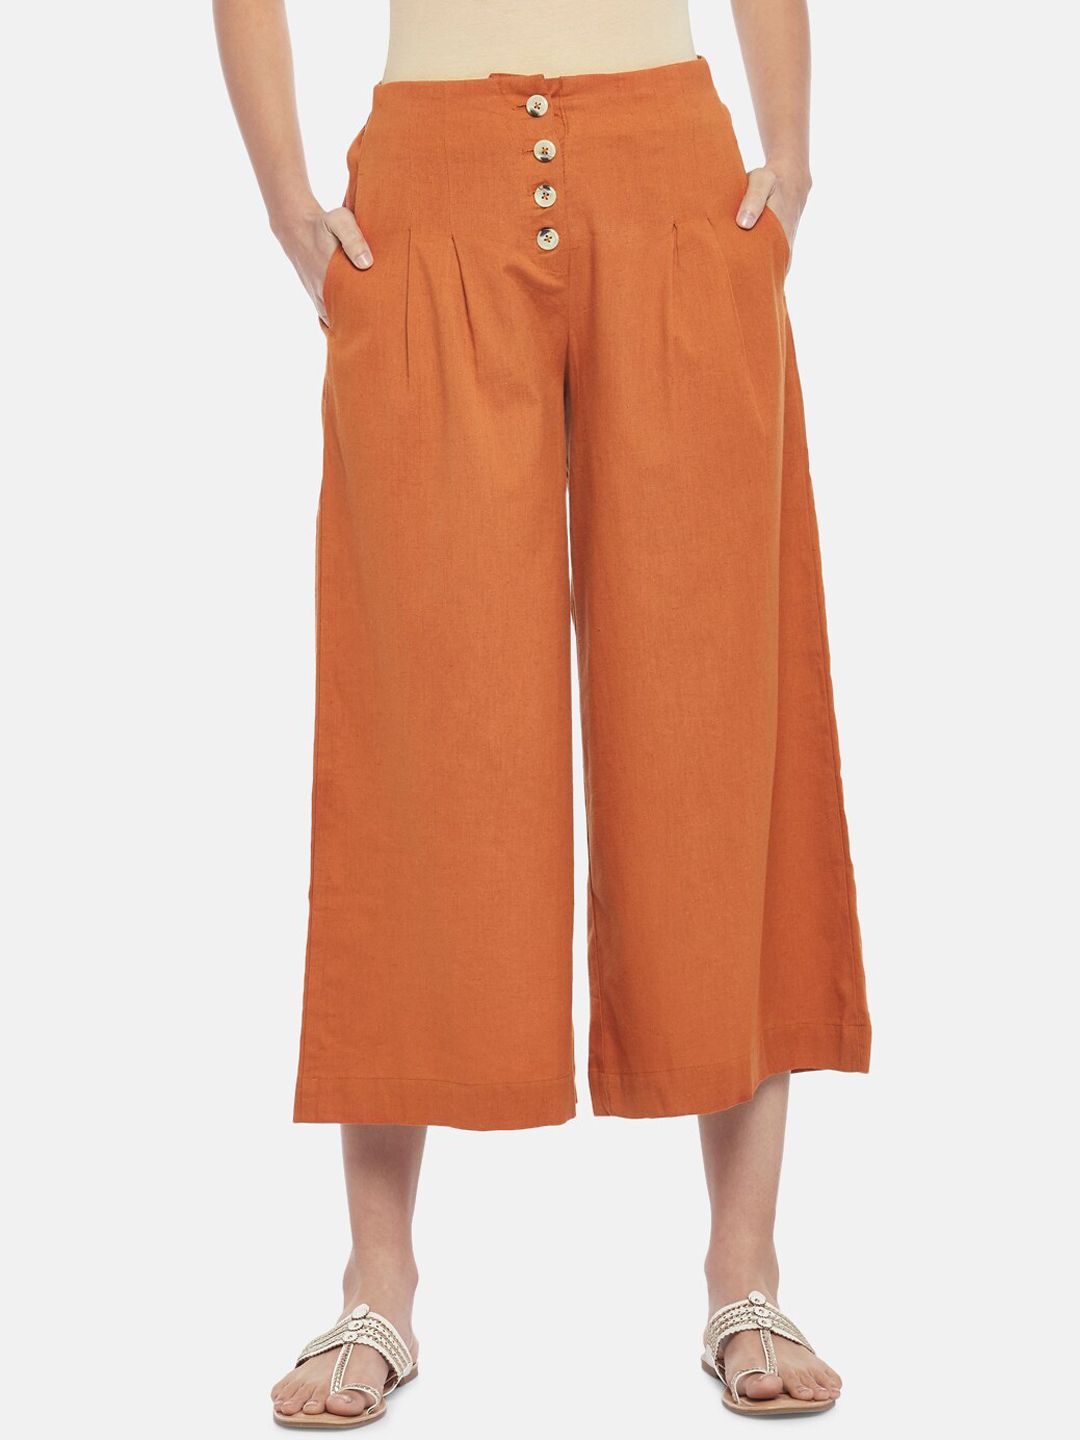 AKKRITI BY PANTALOONS Women Rust Culottes Trousers Price in India